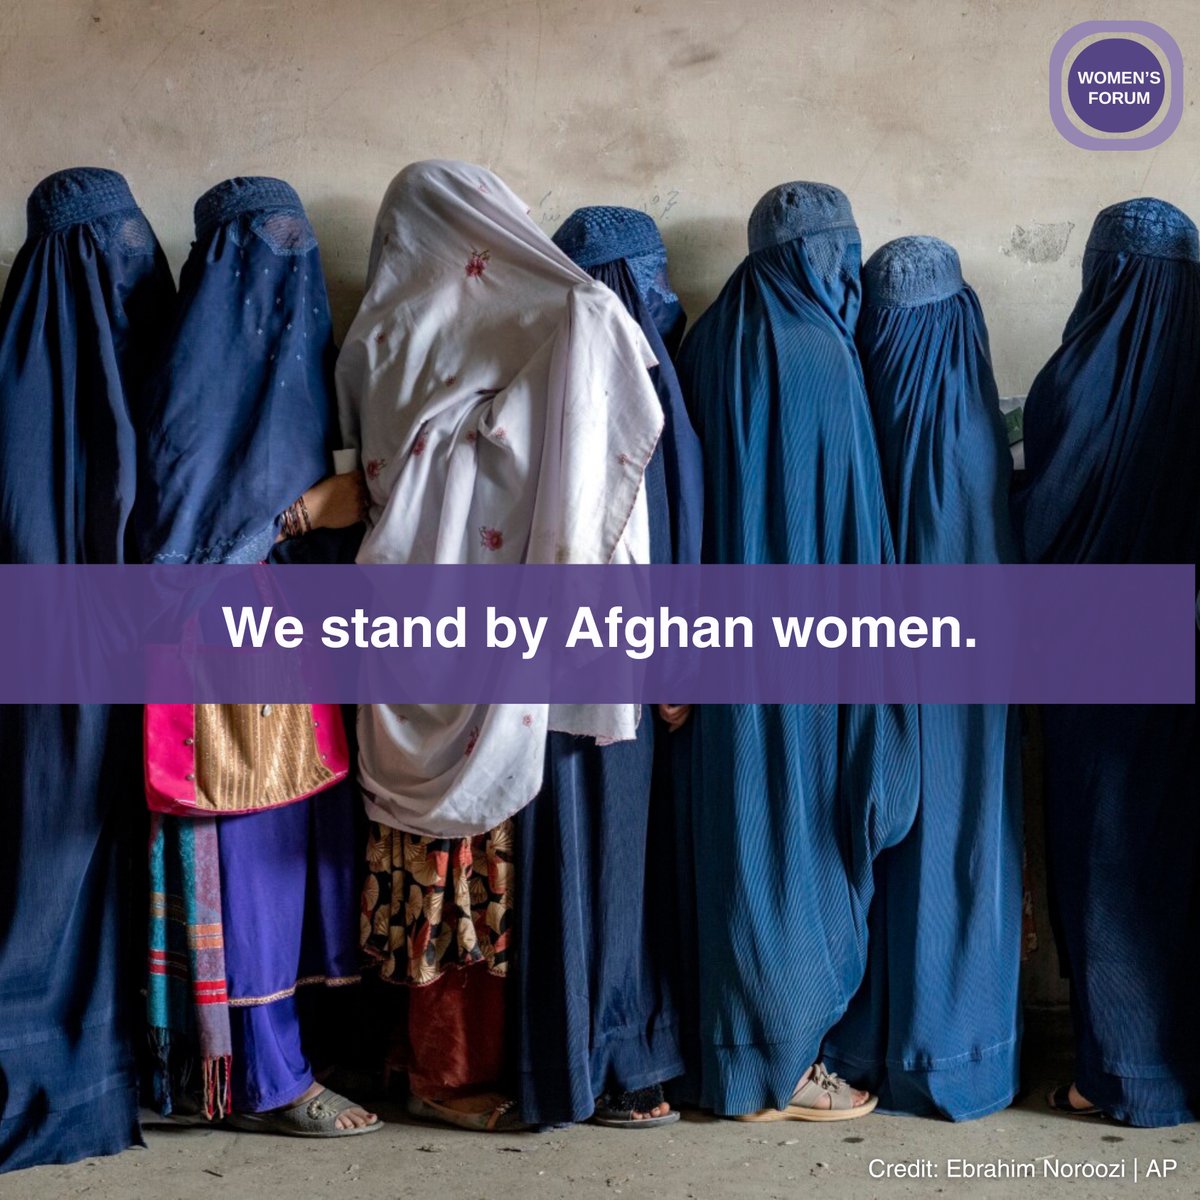 Yesterday marked 2 years since the #Taliban took control of #Afghanistan. This period has been characterised by the gradual erosion of human rights, with #AfghanWomen bearing the brunt of the restrictions. We stand in solidarity with these brave women & girls, today & everyday.✊